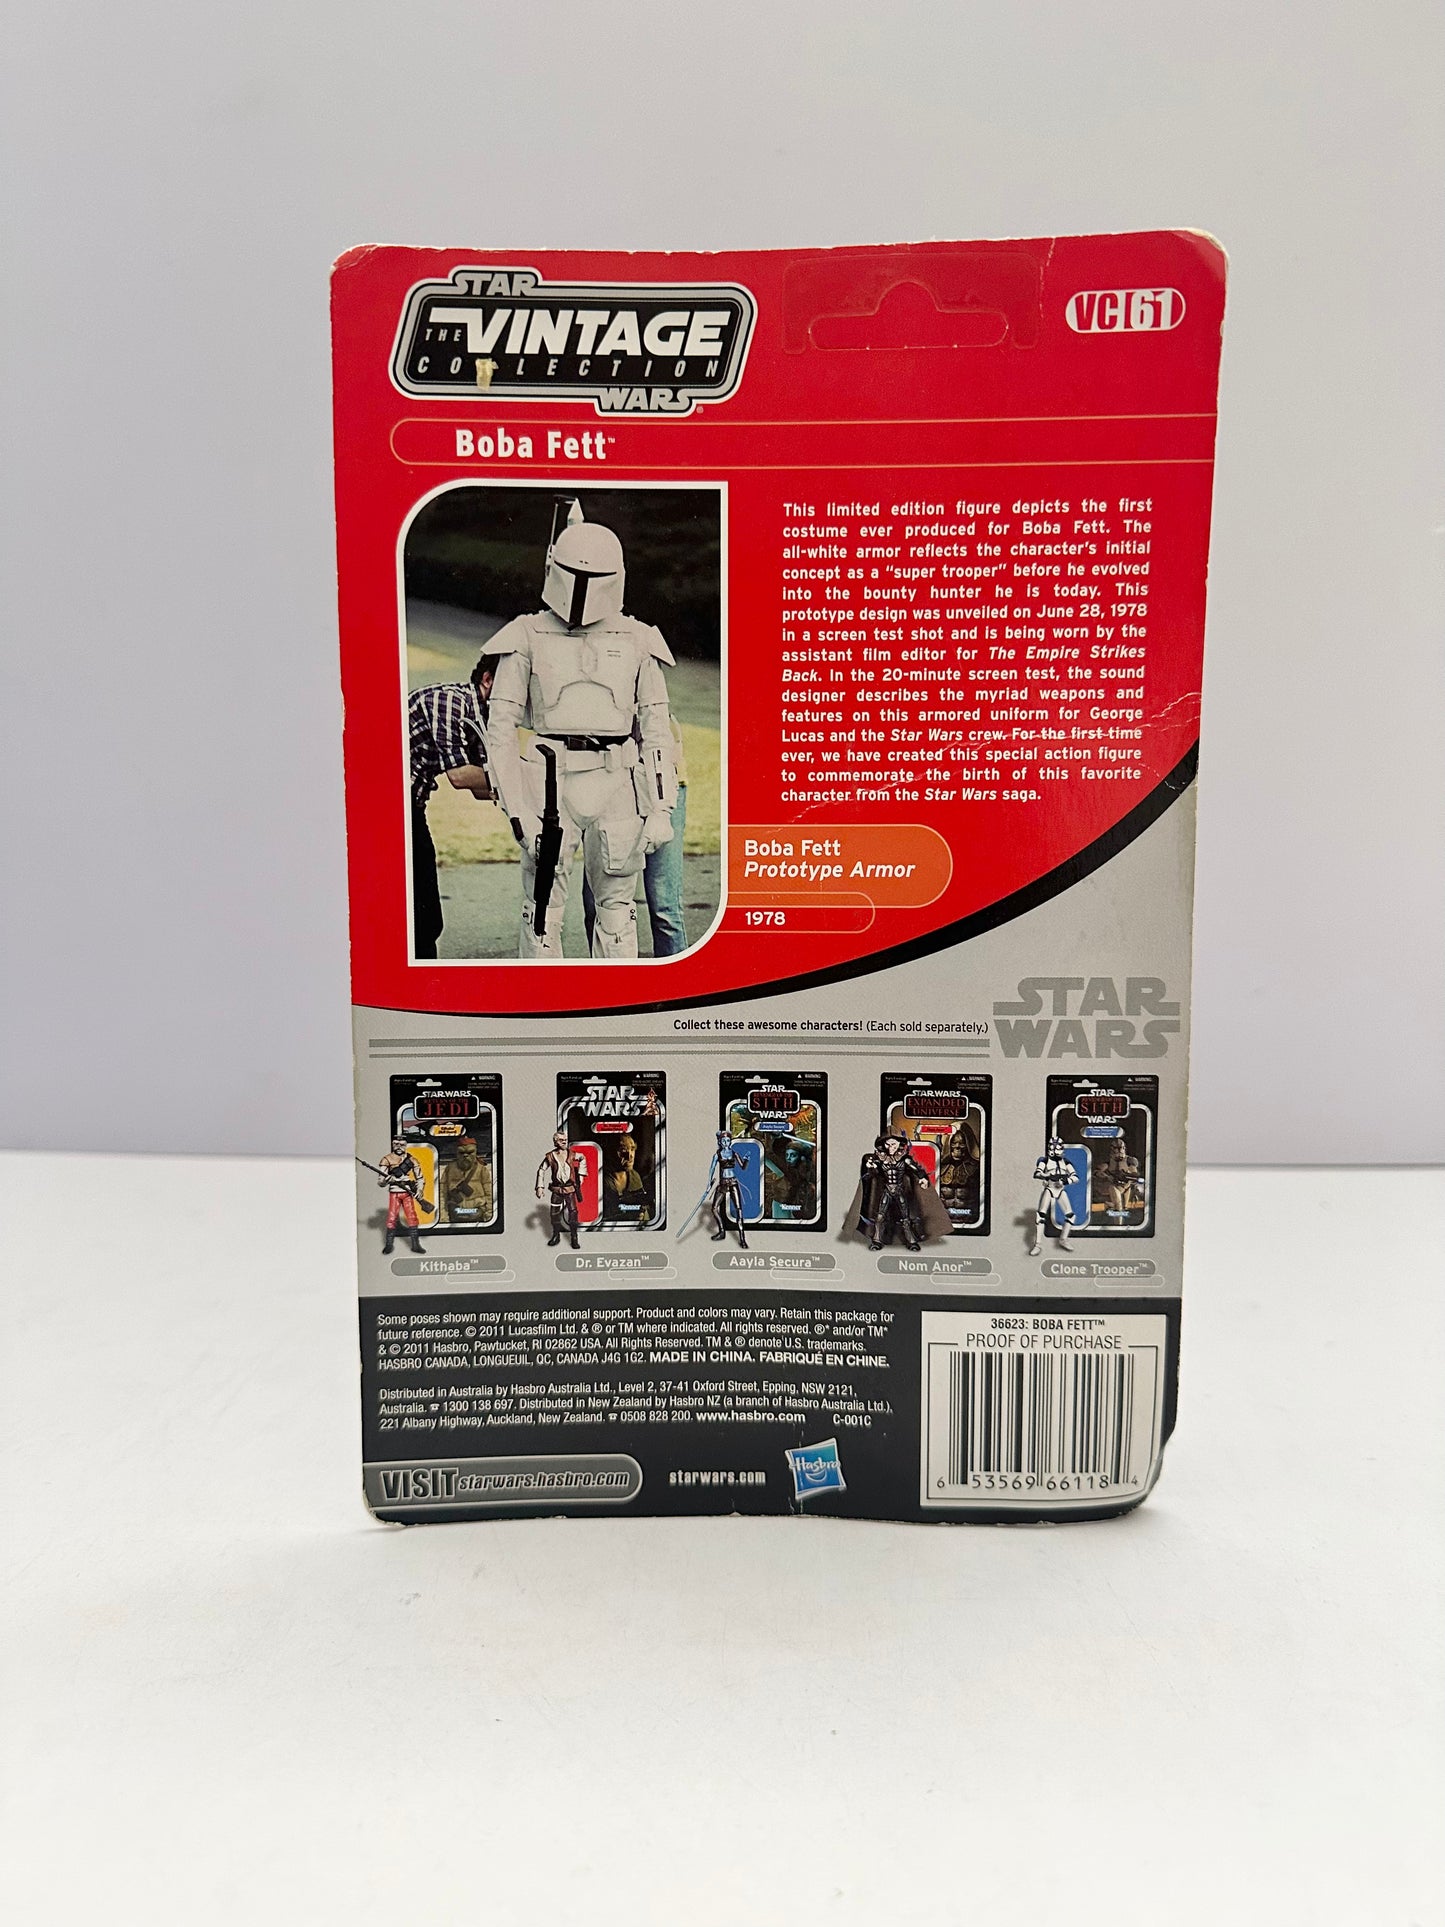 Star Wars The Vintage Collection Boba Fett Prototype Armor